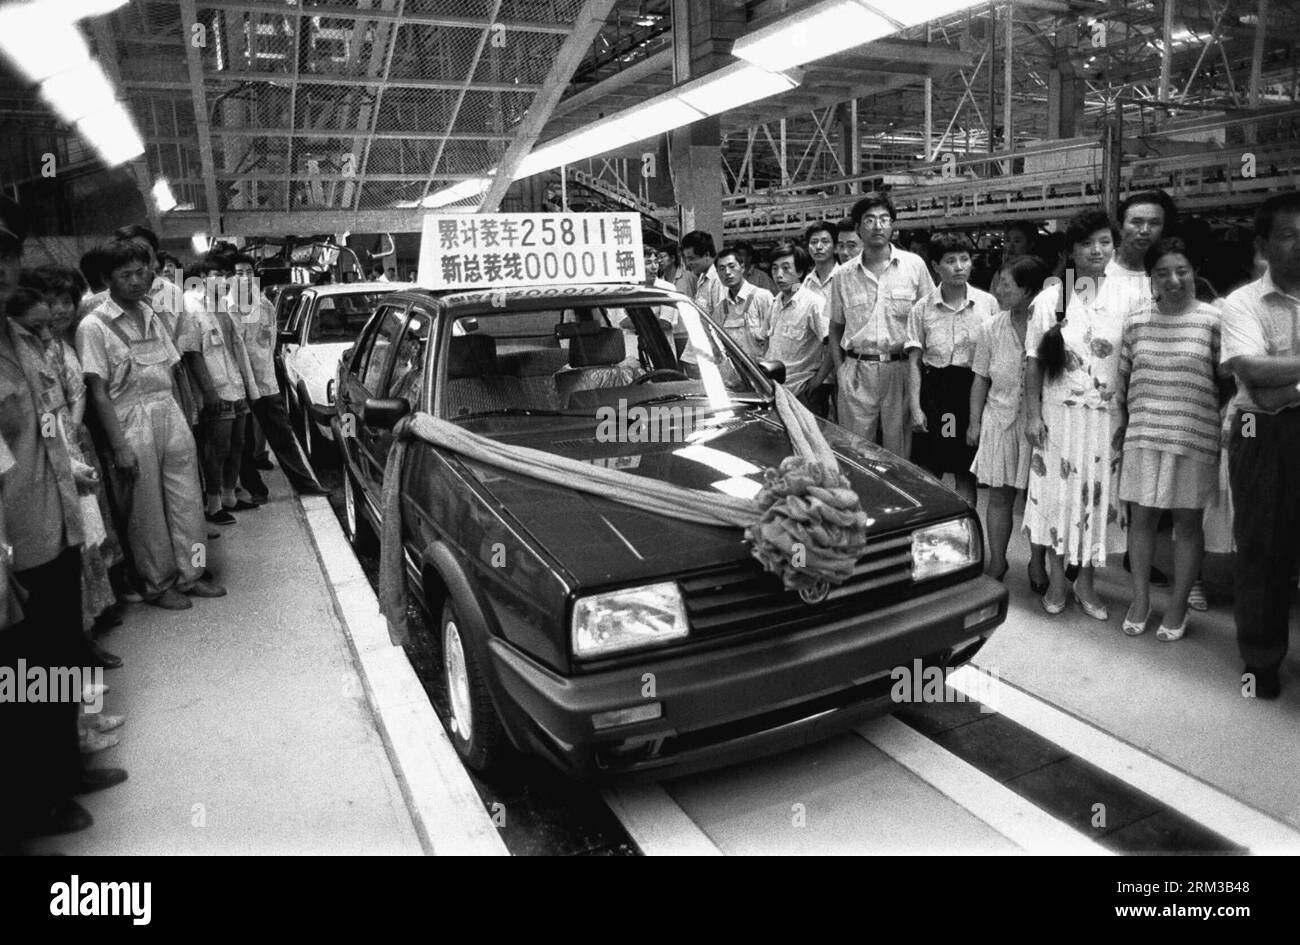 Bildnummer: 60123037  Datum: 14.07.2013  Copyright: imago/Xinhua  File photo taken on Aug. 1, 1994 shows the first sedan by the China-German joint venture automotive manufacturer FAW-VW rolling off the assembling line in Changchun, capital of northeast China s Jilin Province. The First Automotive Works Group (FAW) will have its 60th founding anniversary on July 15, 2013, which also marks the history of China s auto industry. Founded in 1953, the auto maker is known as the cradle of China s automobile industry for it produced the country s first self-made truck, the Jiefang, in 1956. Since then Stock Photo